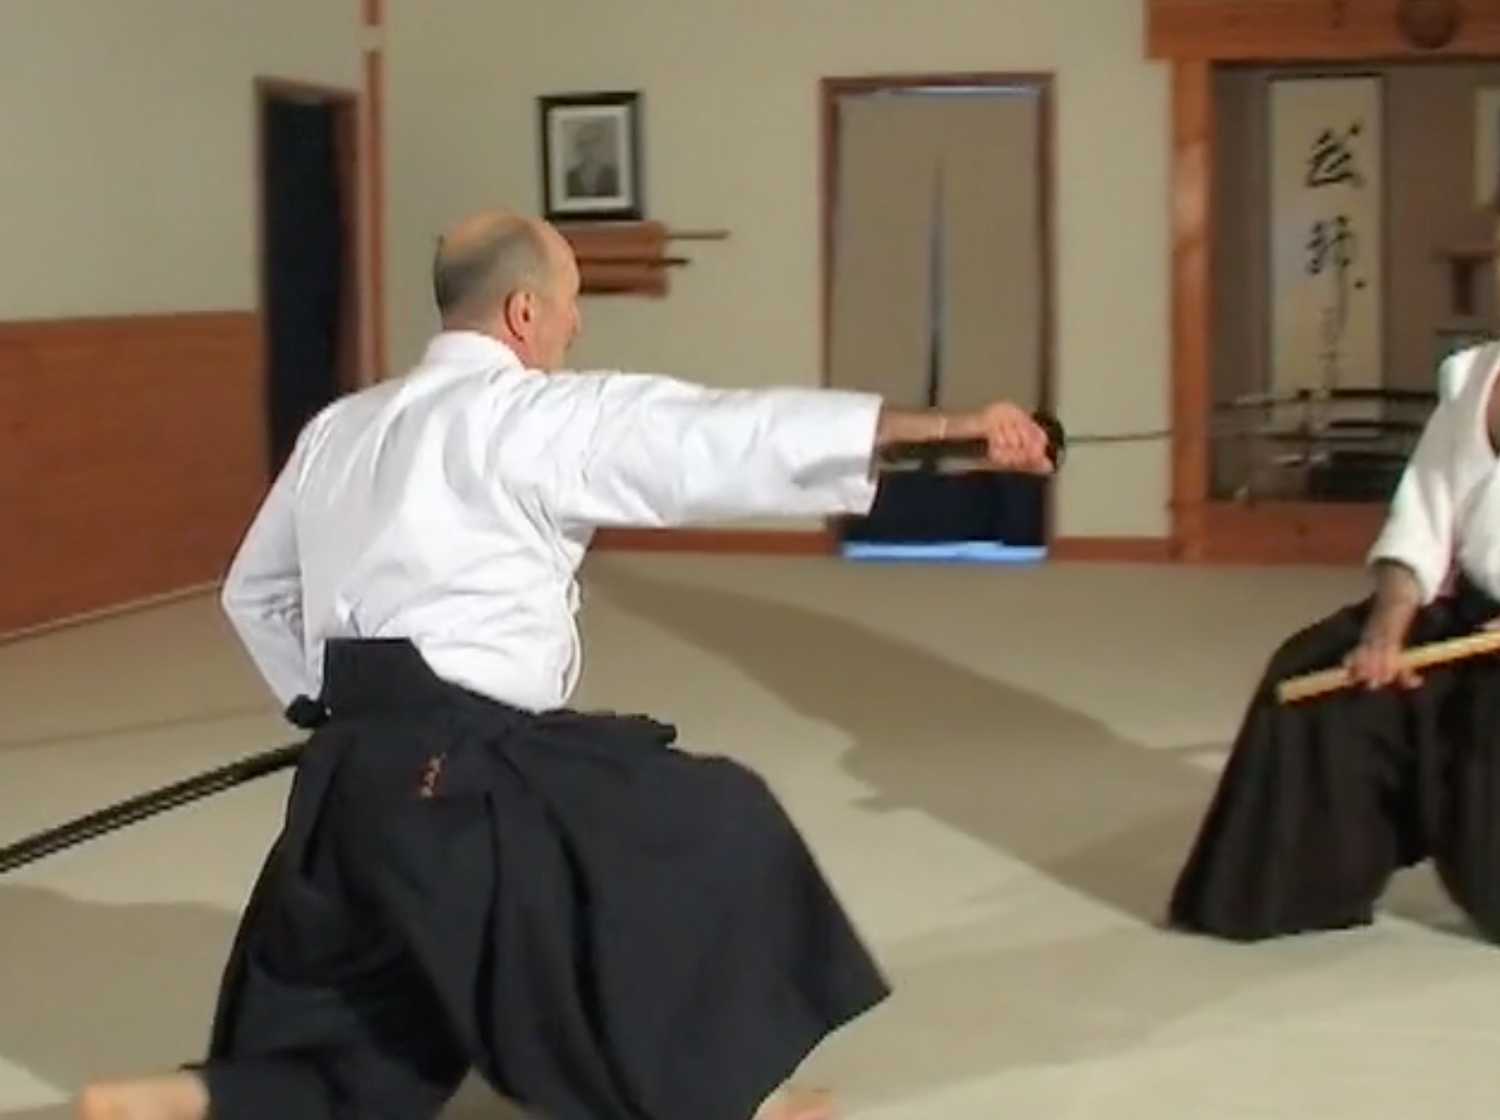 Complete Introduction to Muso Shinden Ryu Iaido DVD with Didier Boyet